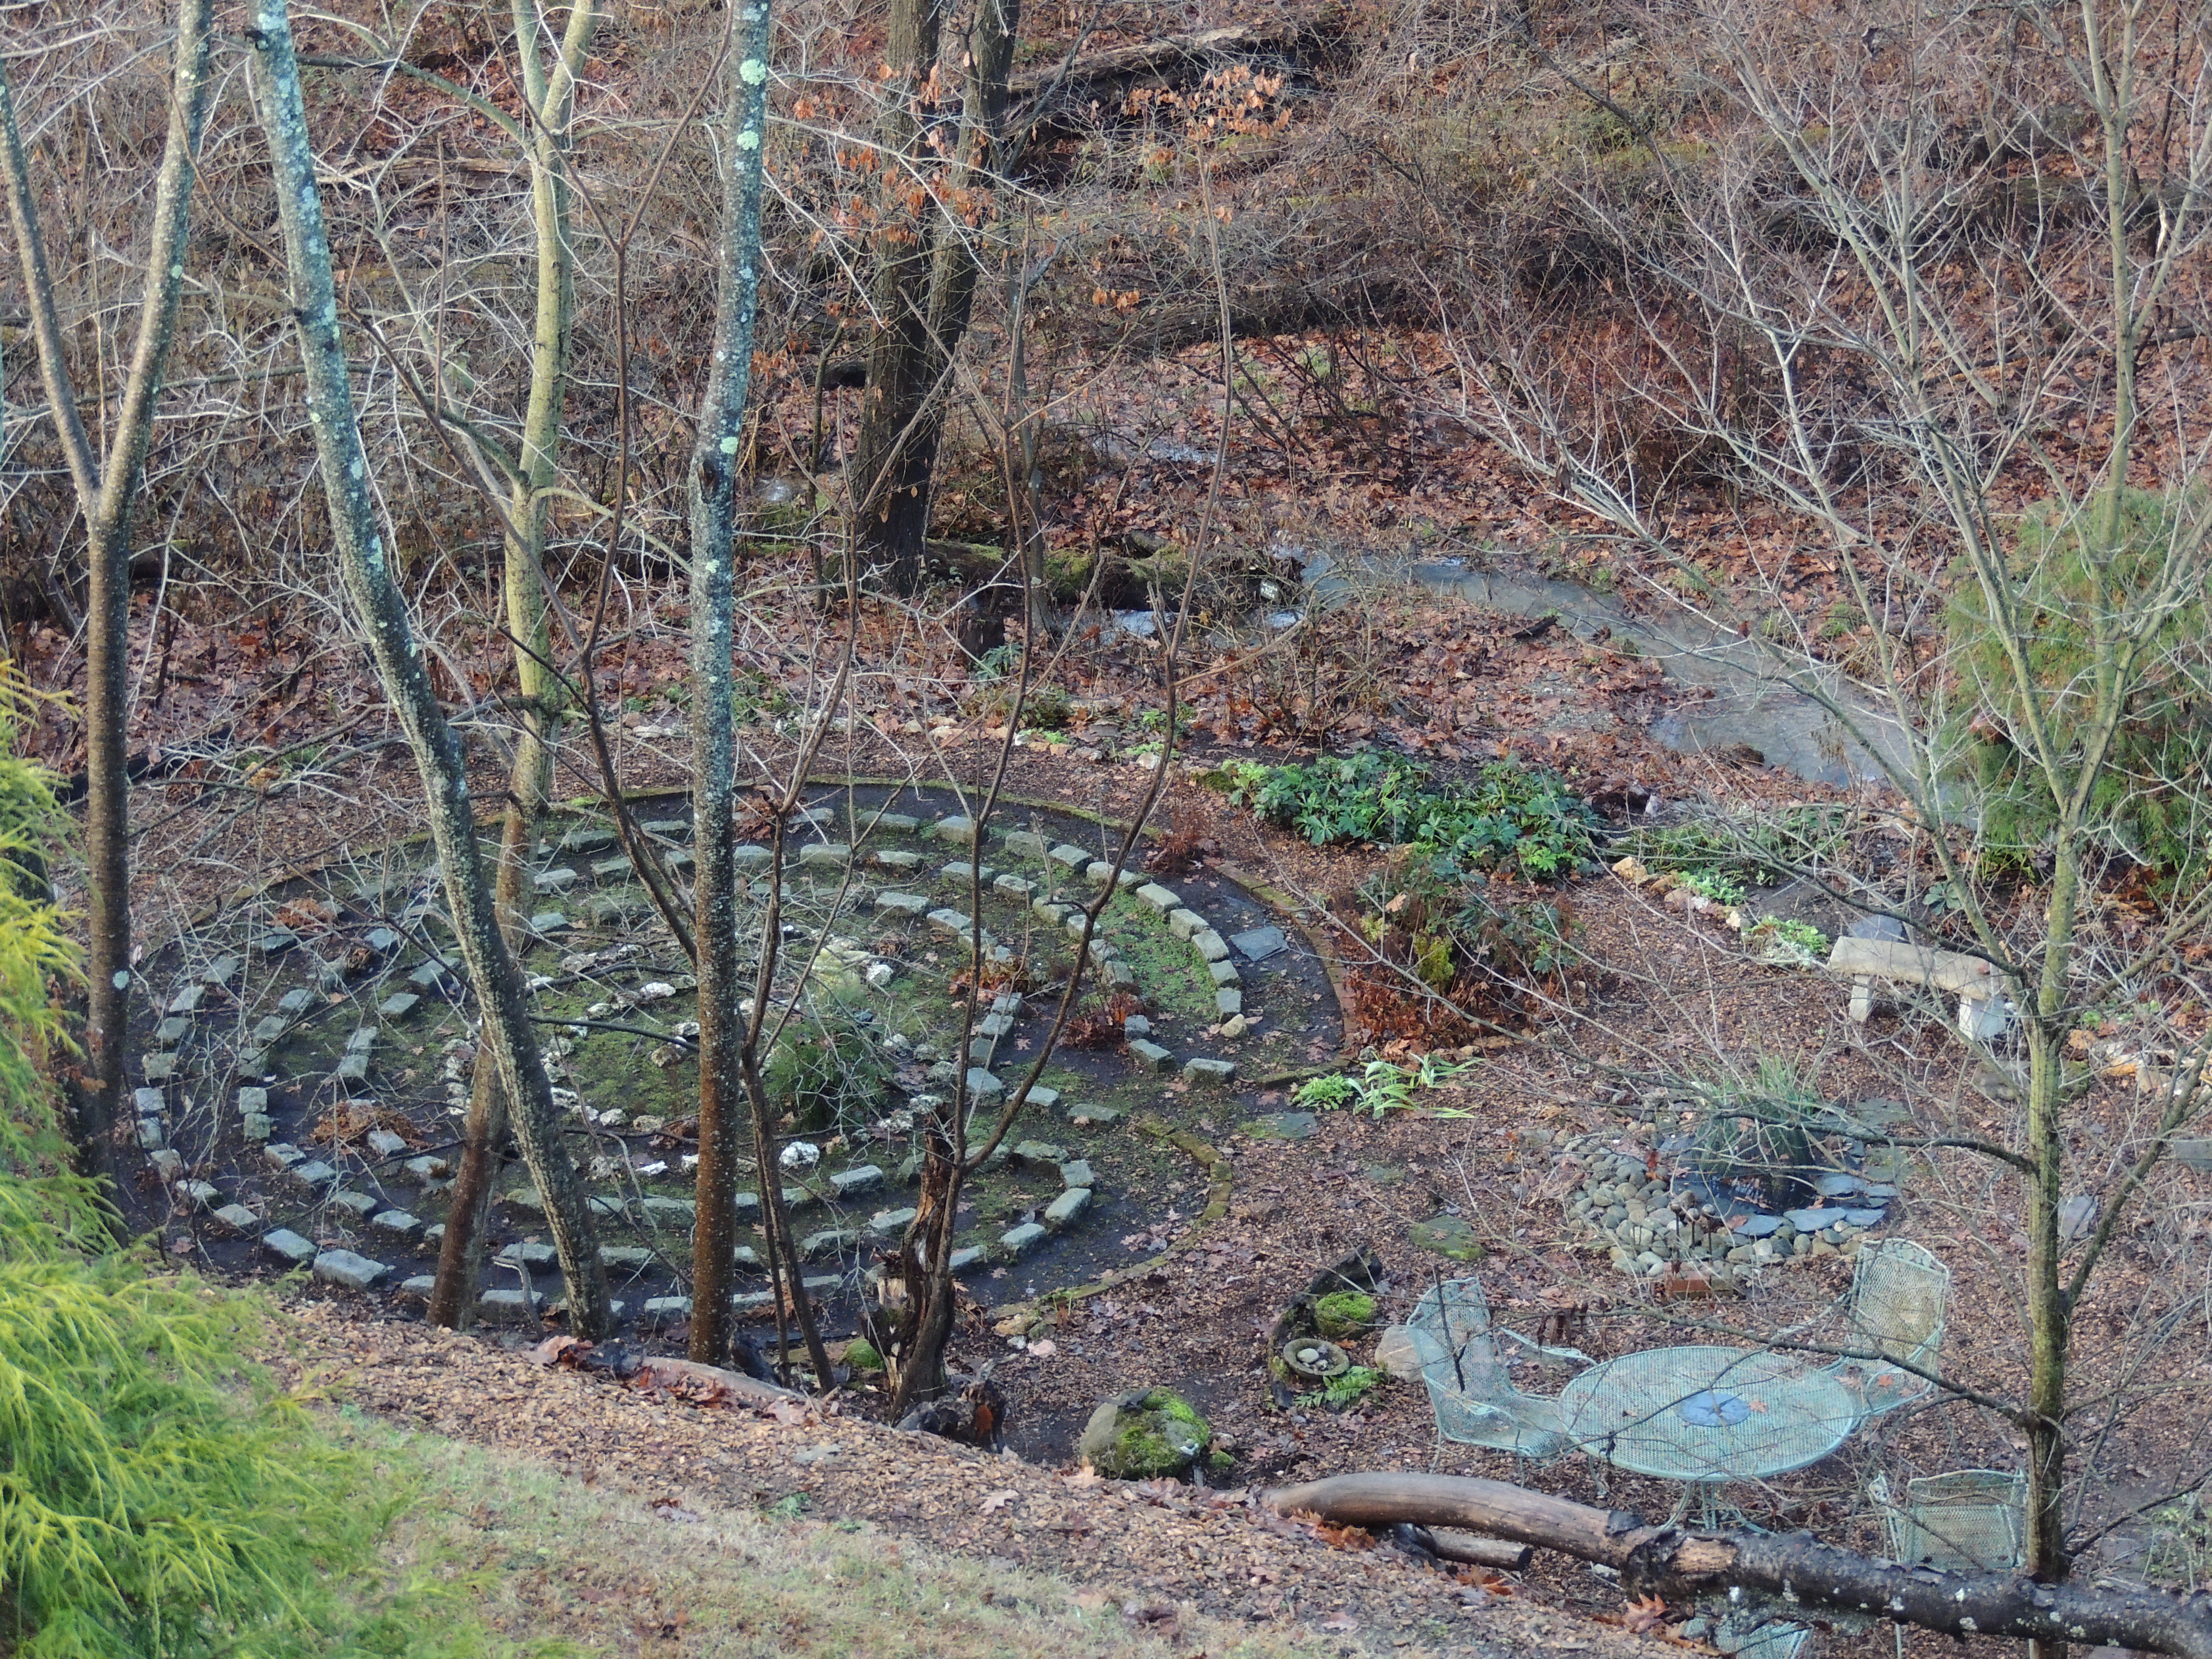 DECEMBER 2018 looking down at the labyrinth